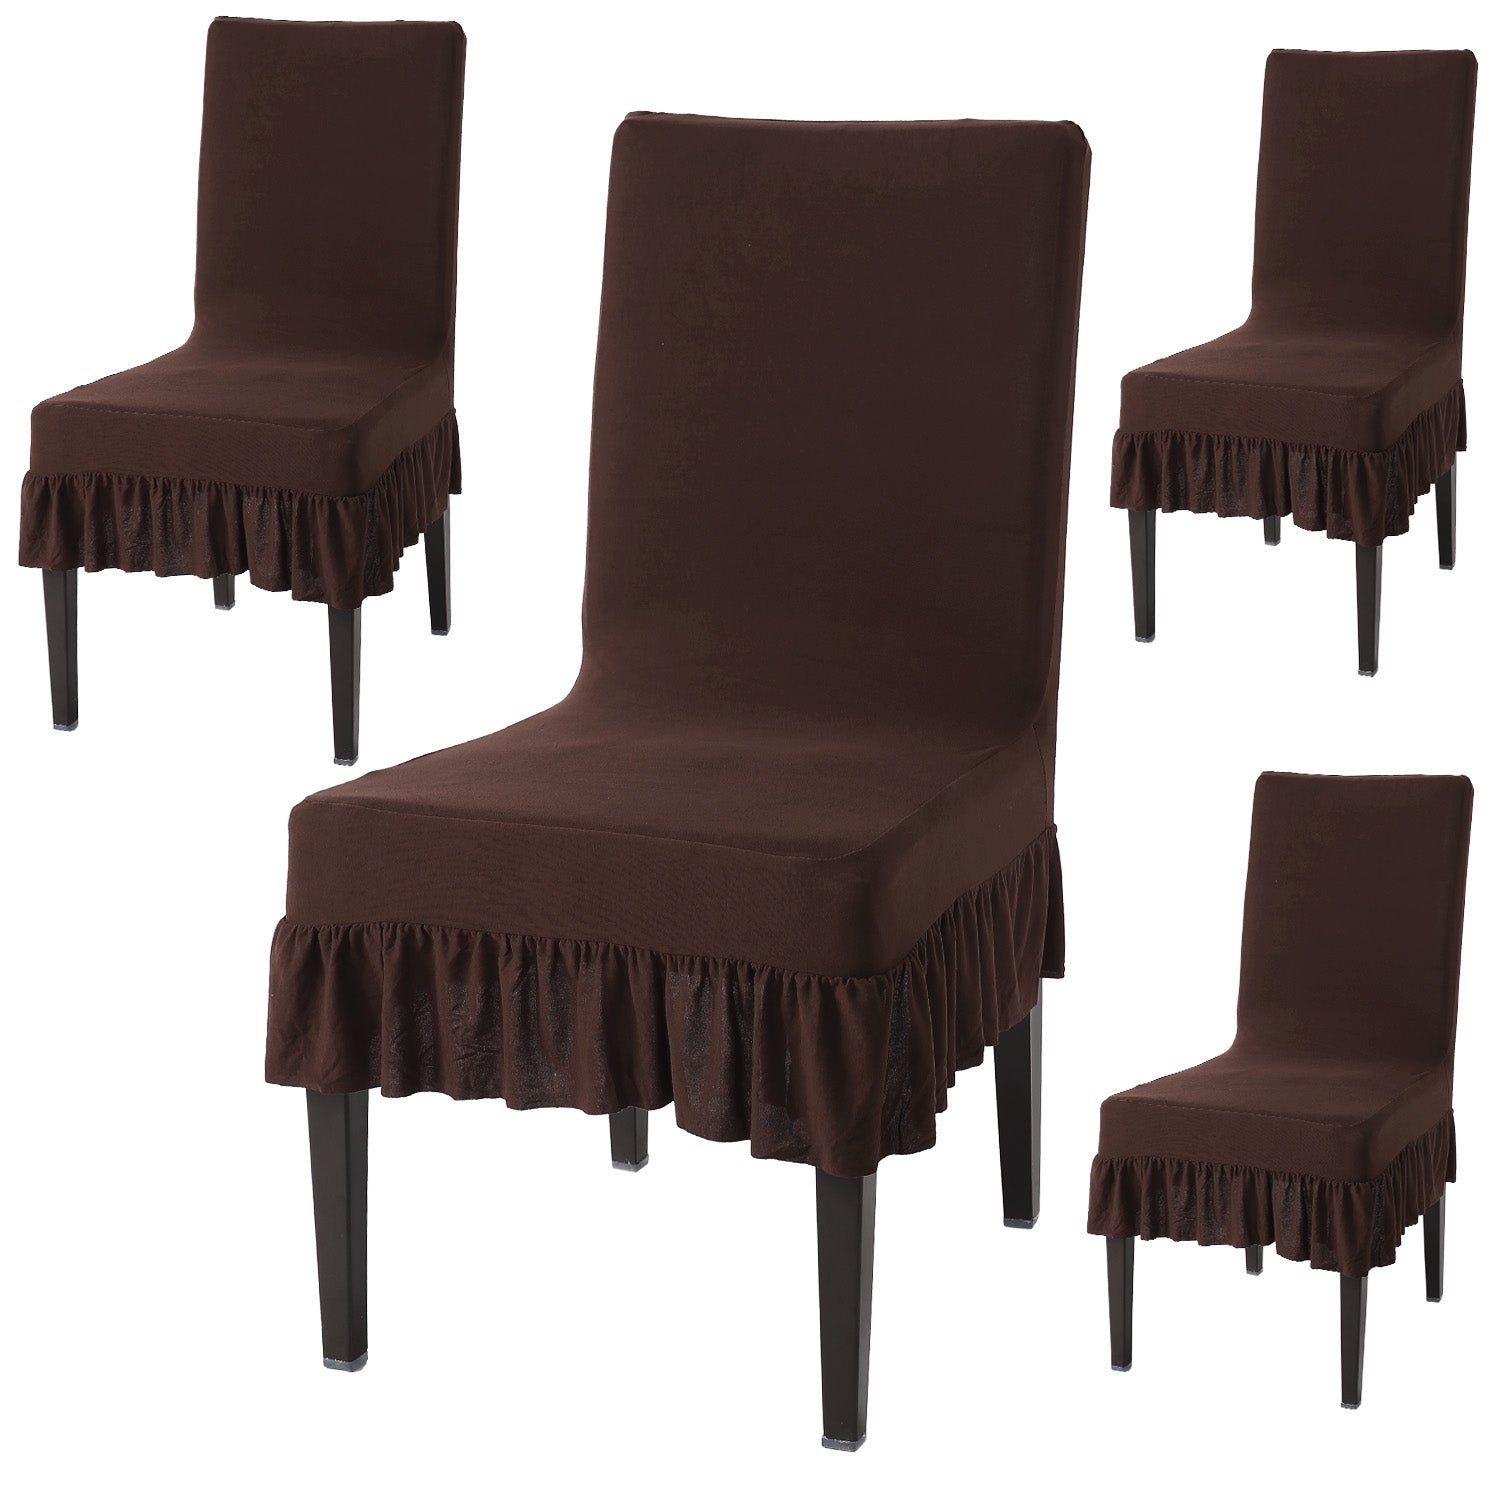 Elastic Stretchable Dining Chair Cover with Frill, Chocolate Brown